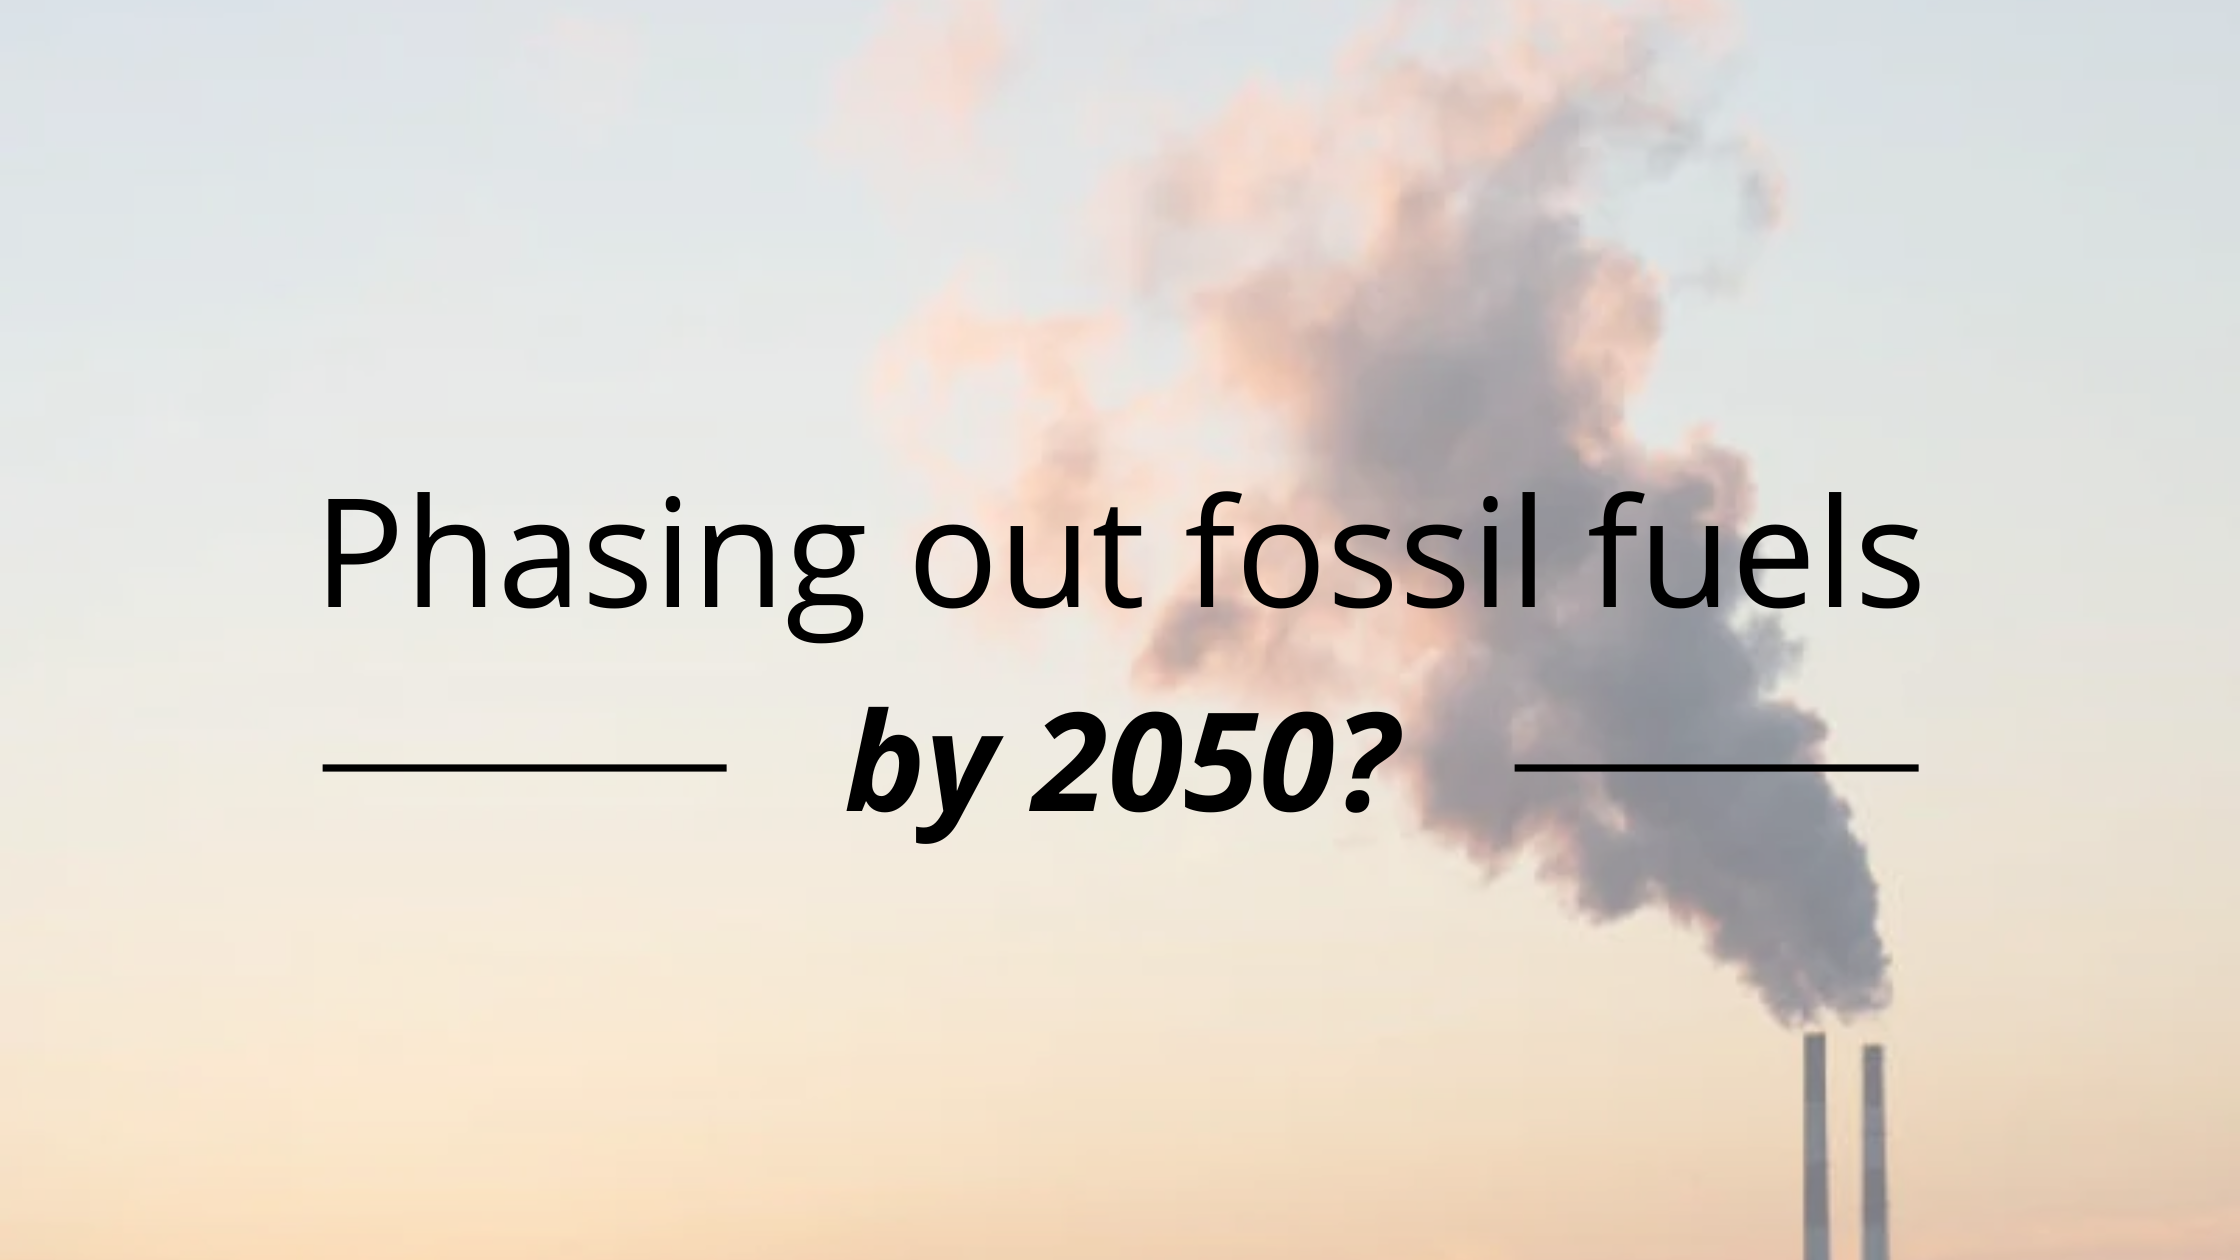 Phasing out fossil fuels by 2050 blog header